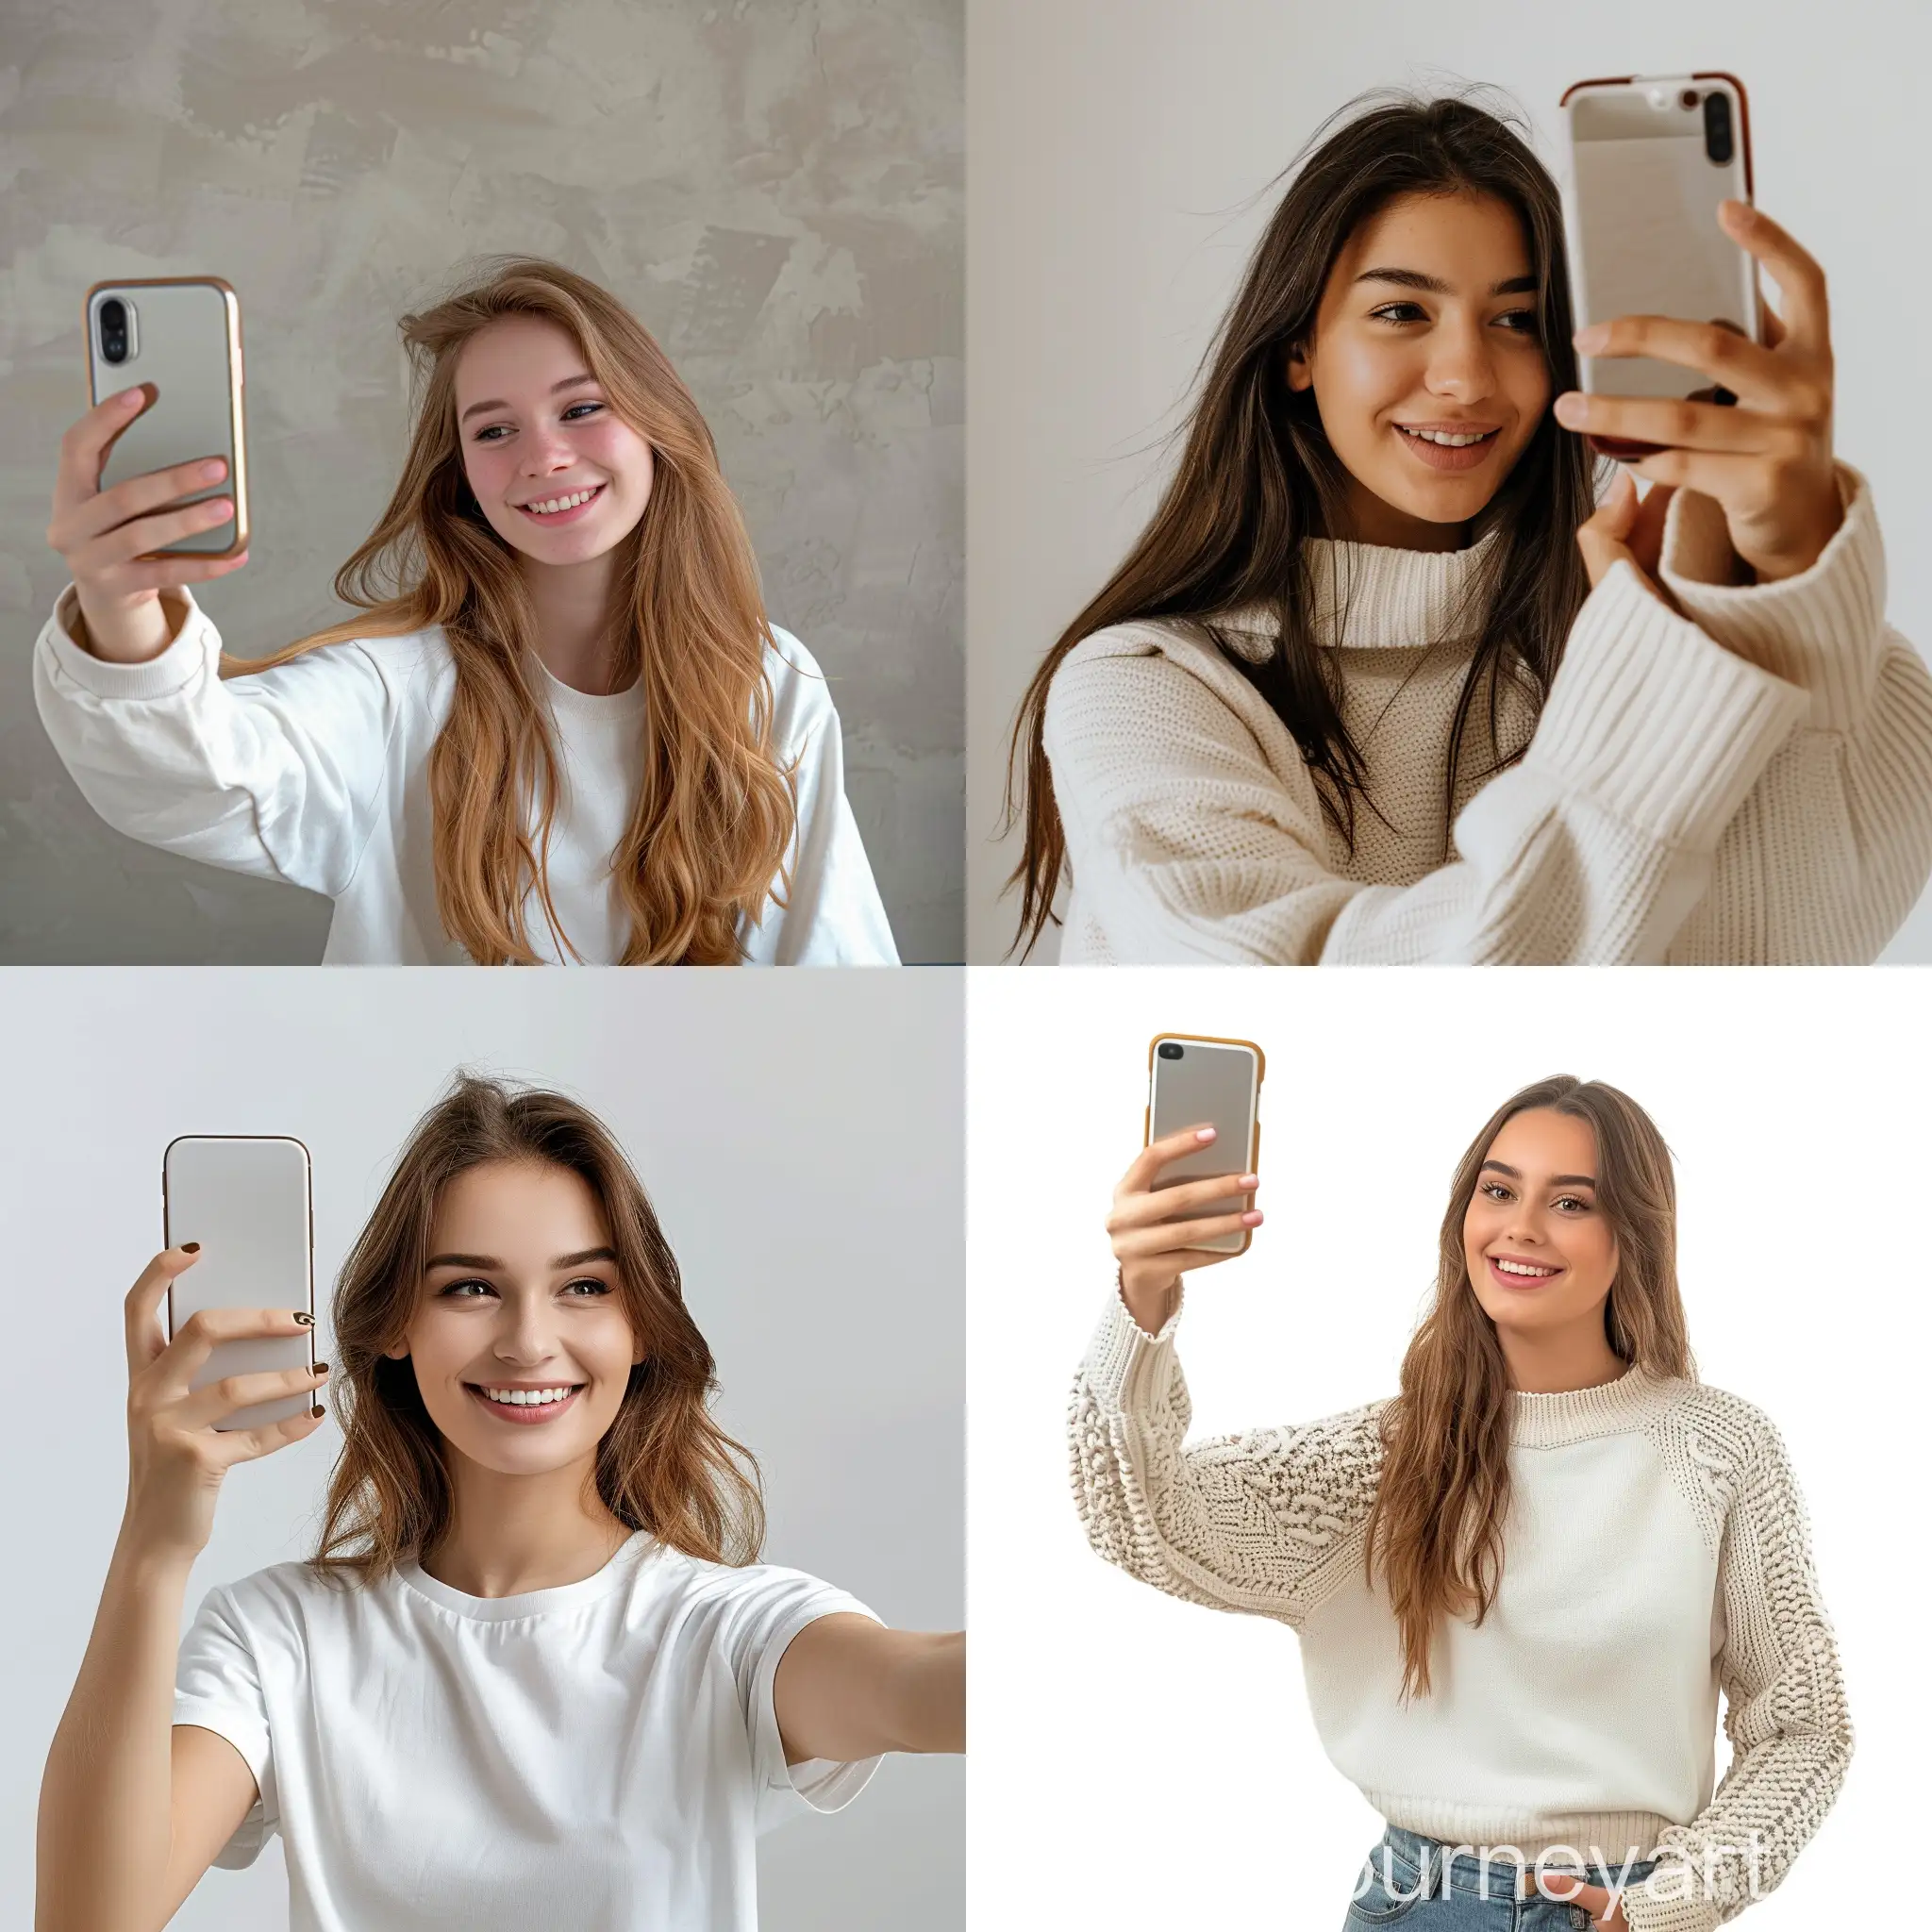 Stylish-Young-Woman-Capturing-a-Selfie-Moment